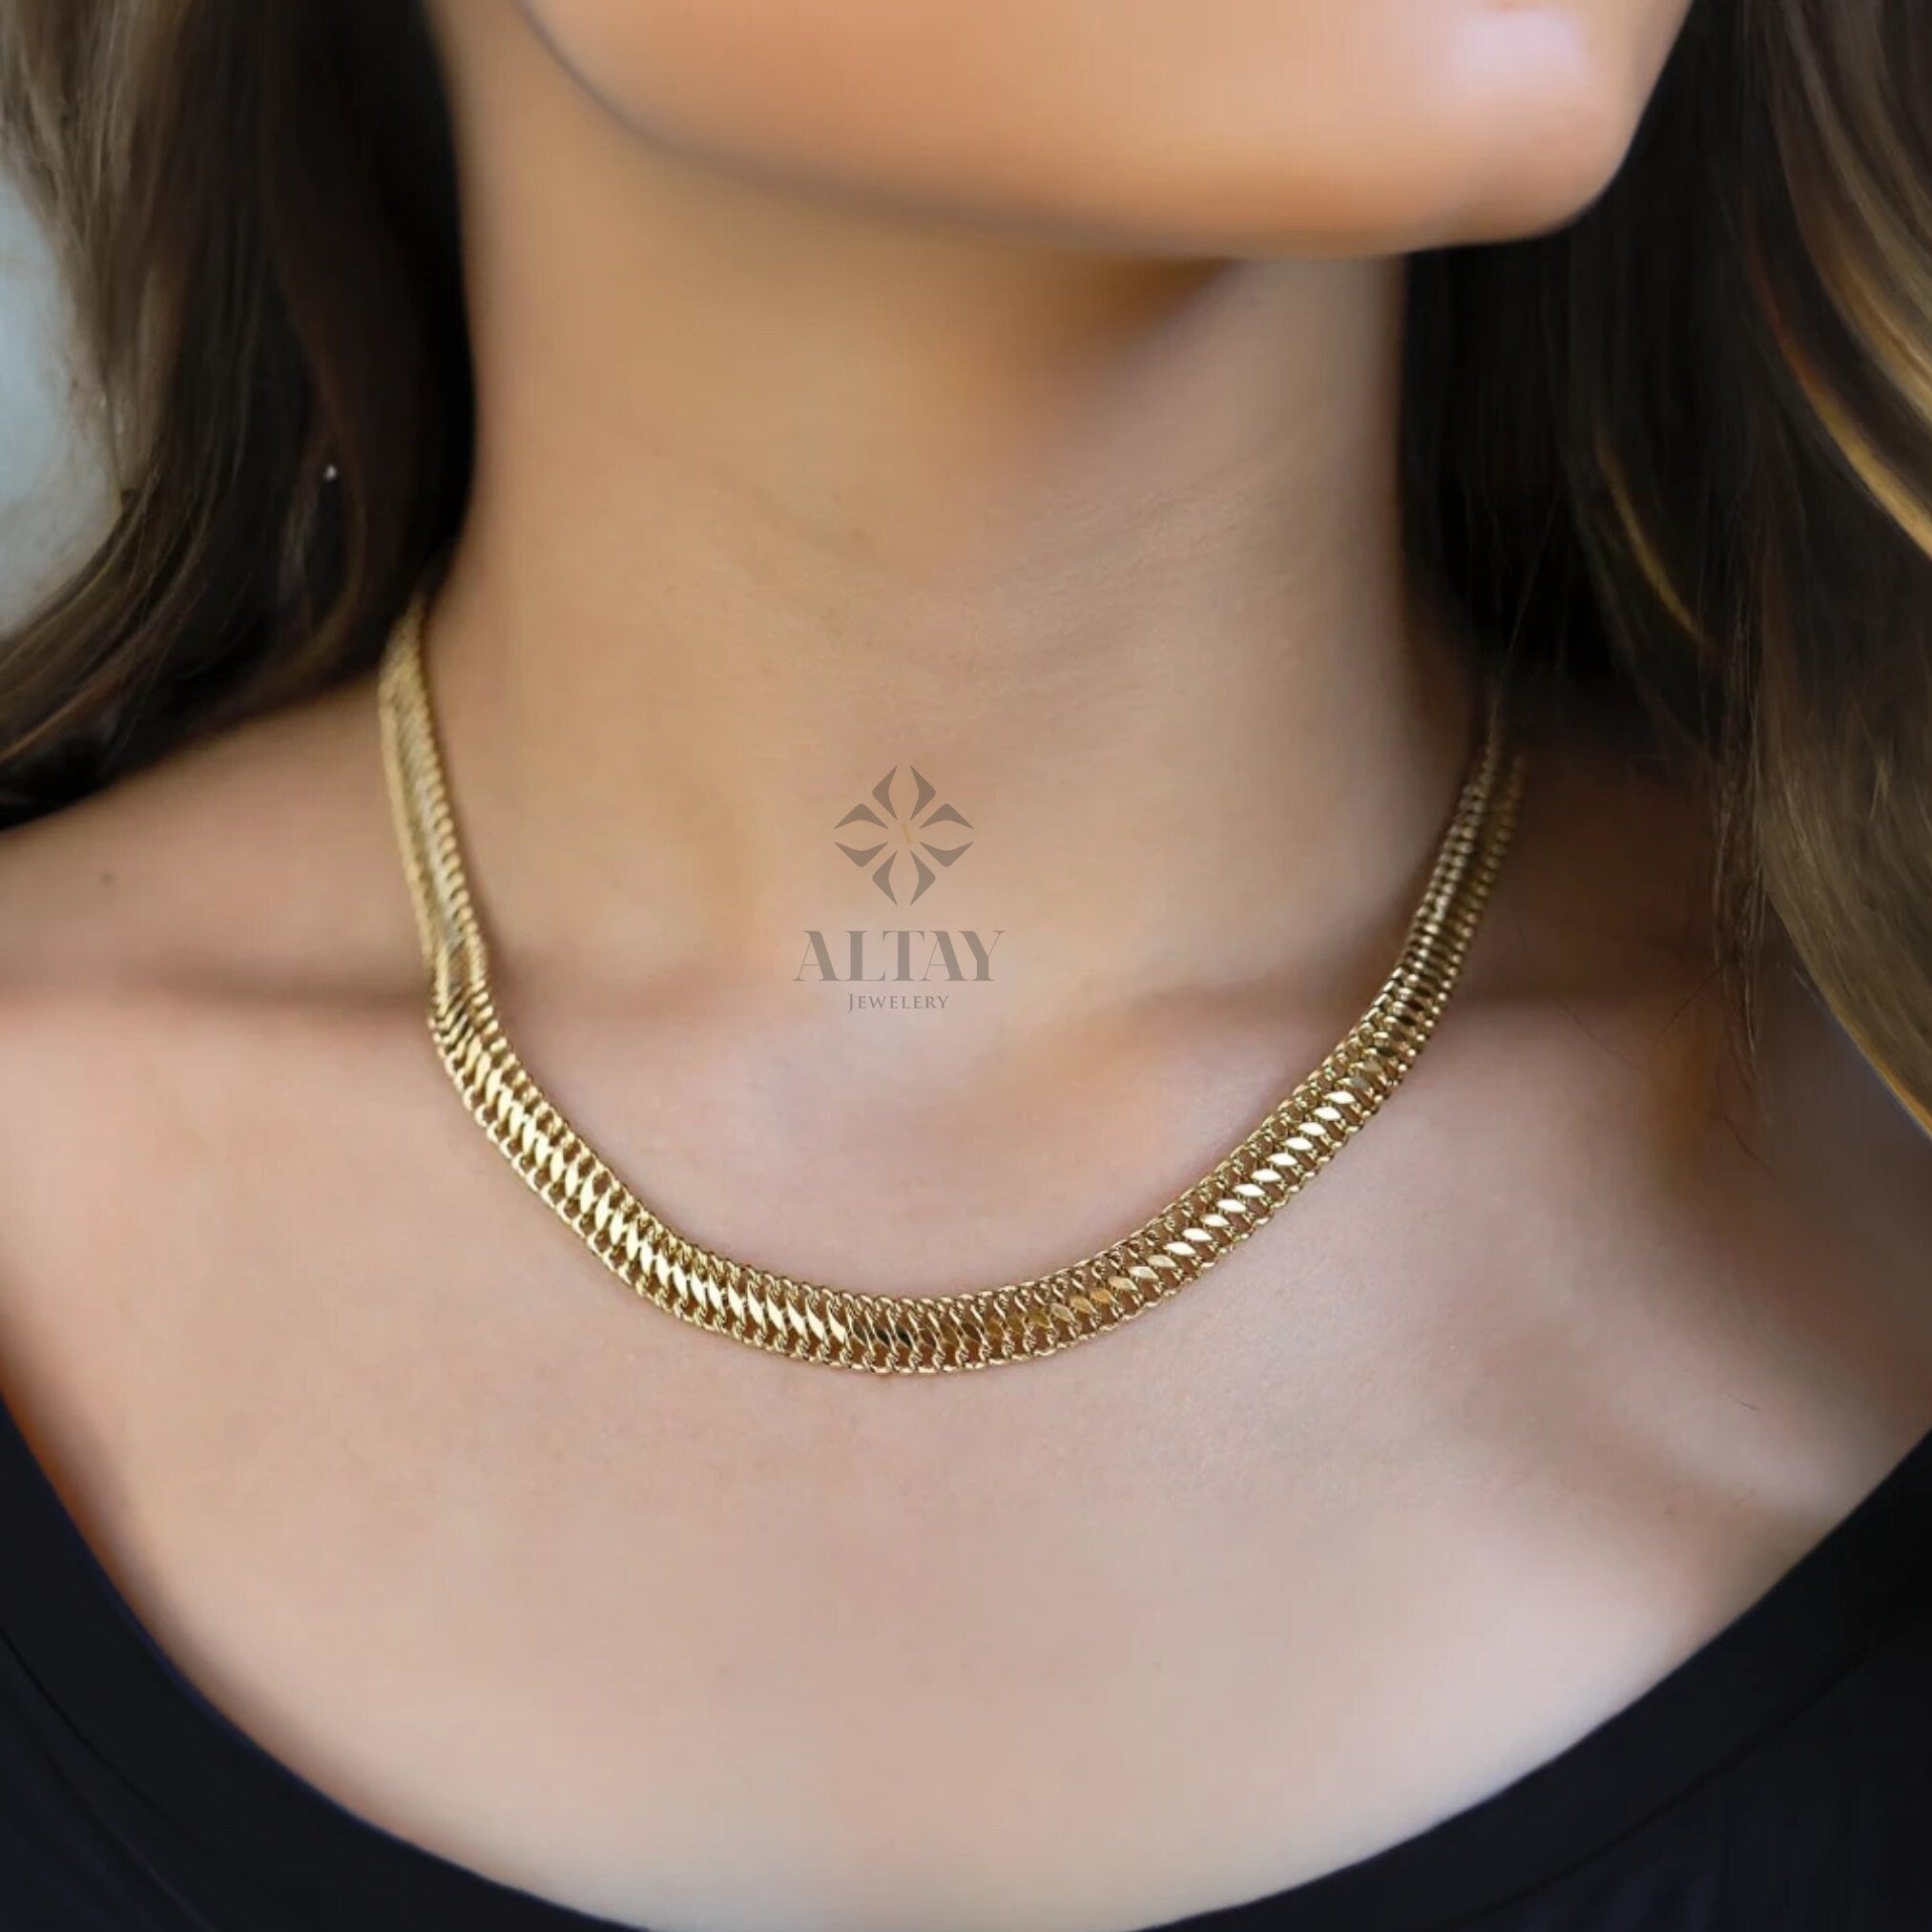 14K Gold Double Curb Chain Necklace, 8mm Vienna Chain Choker, Dailywear Jewelery, Armoured Chain, Minimal Fine Charm Jewelry, Gift For Her